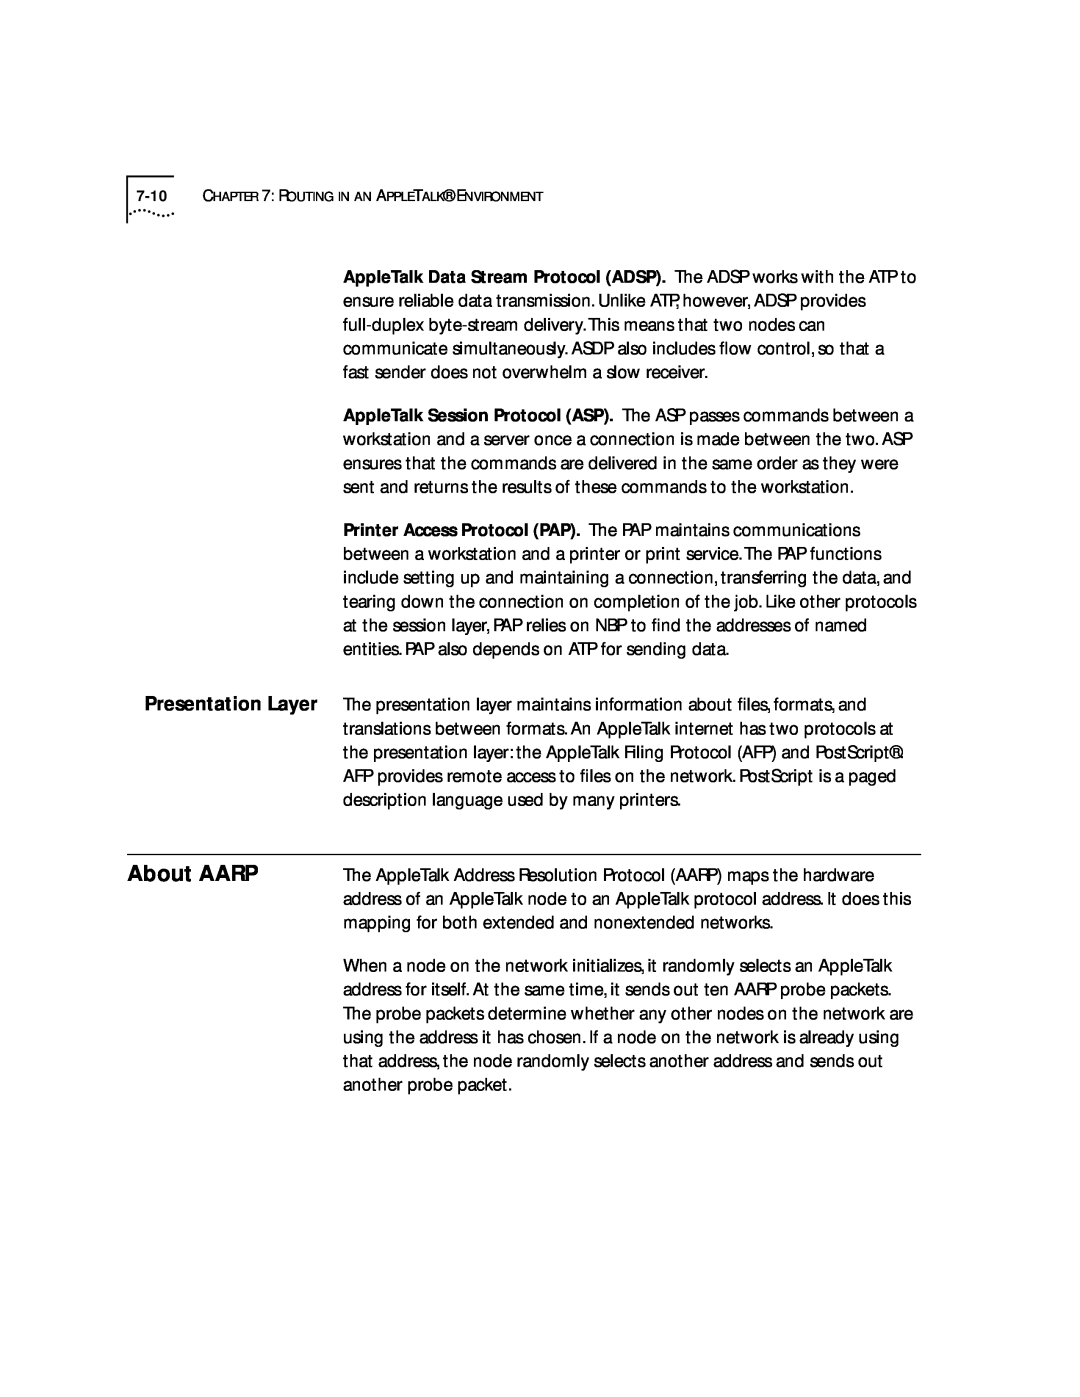 3Com 2500 manual About AARP, description language used by many printers, mapping for both extended and nonextended networks 